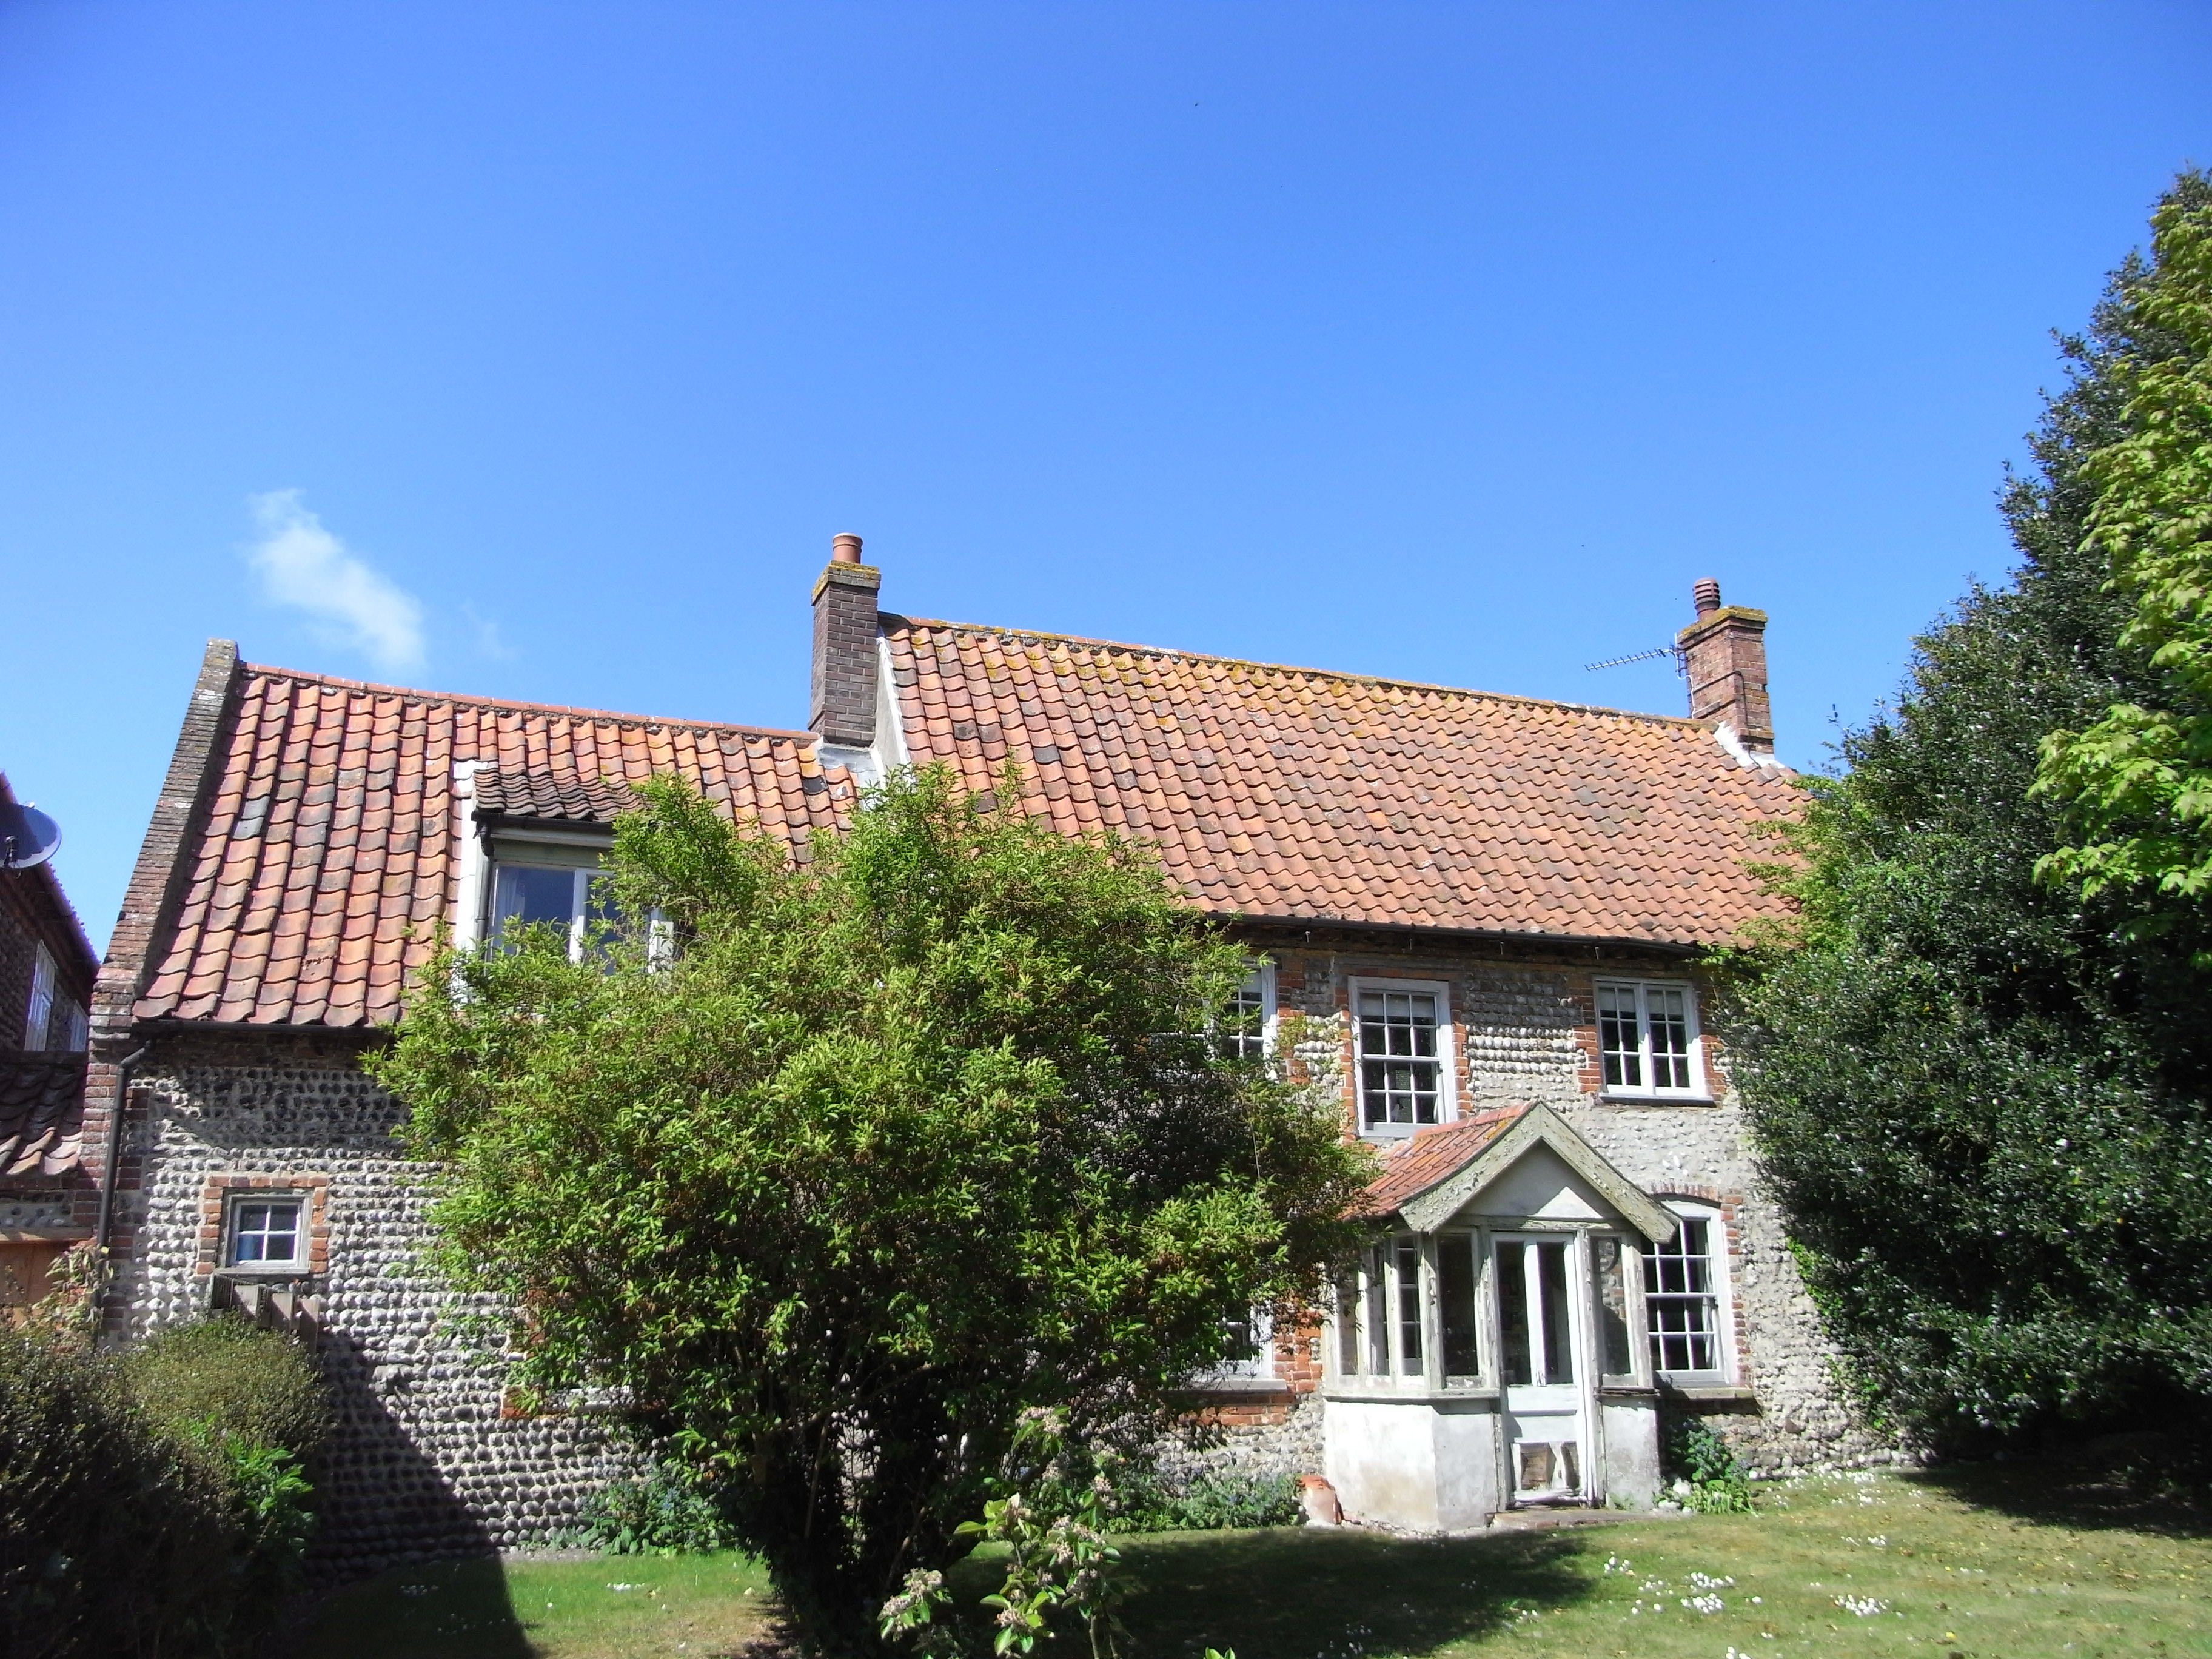 Cottage at Cley, North Norfolk